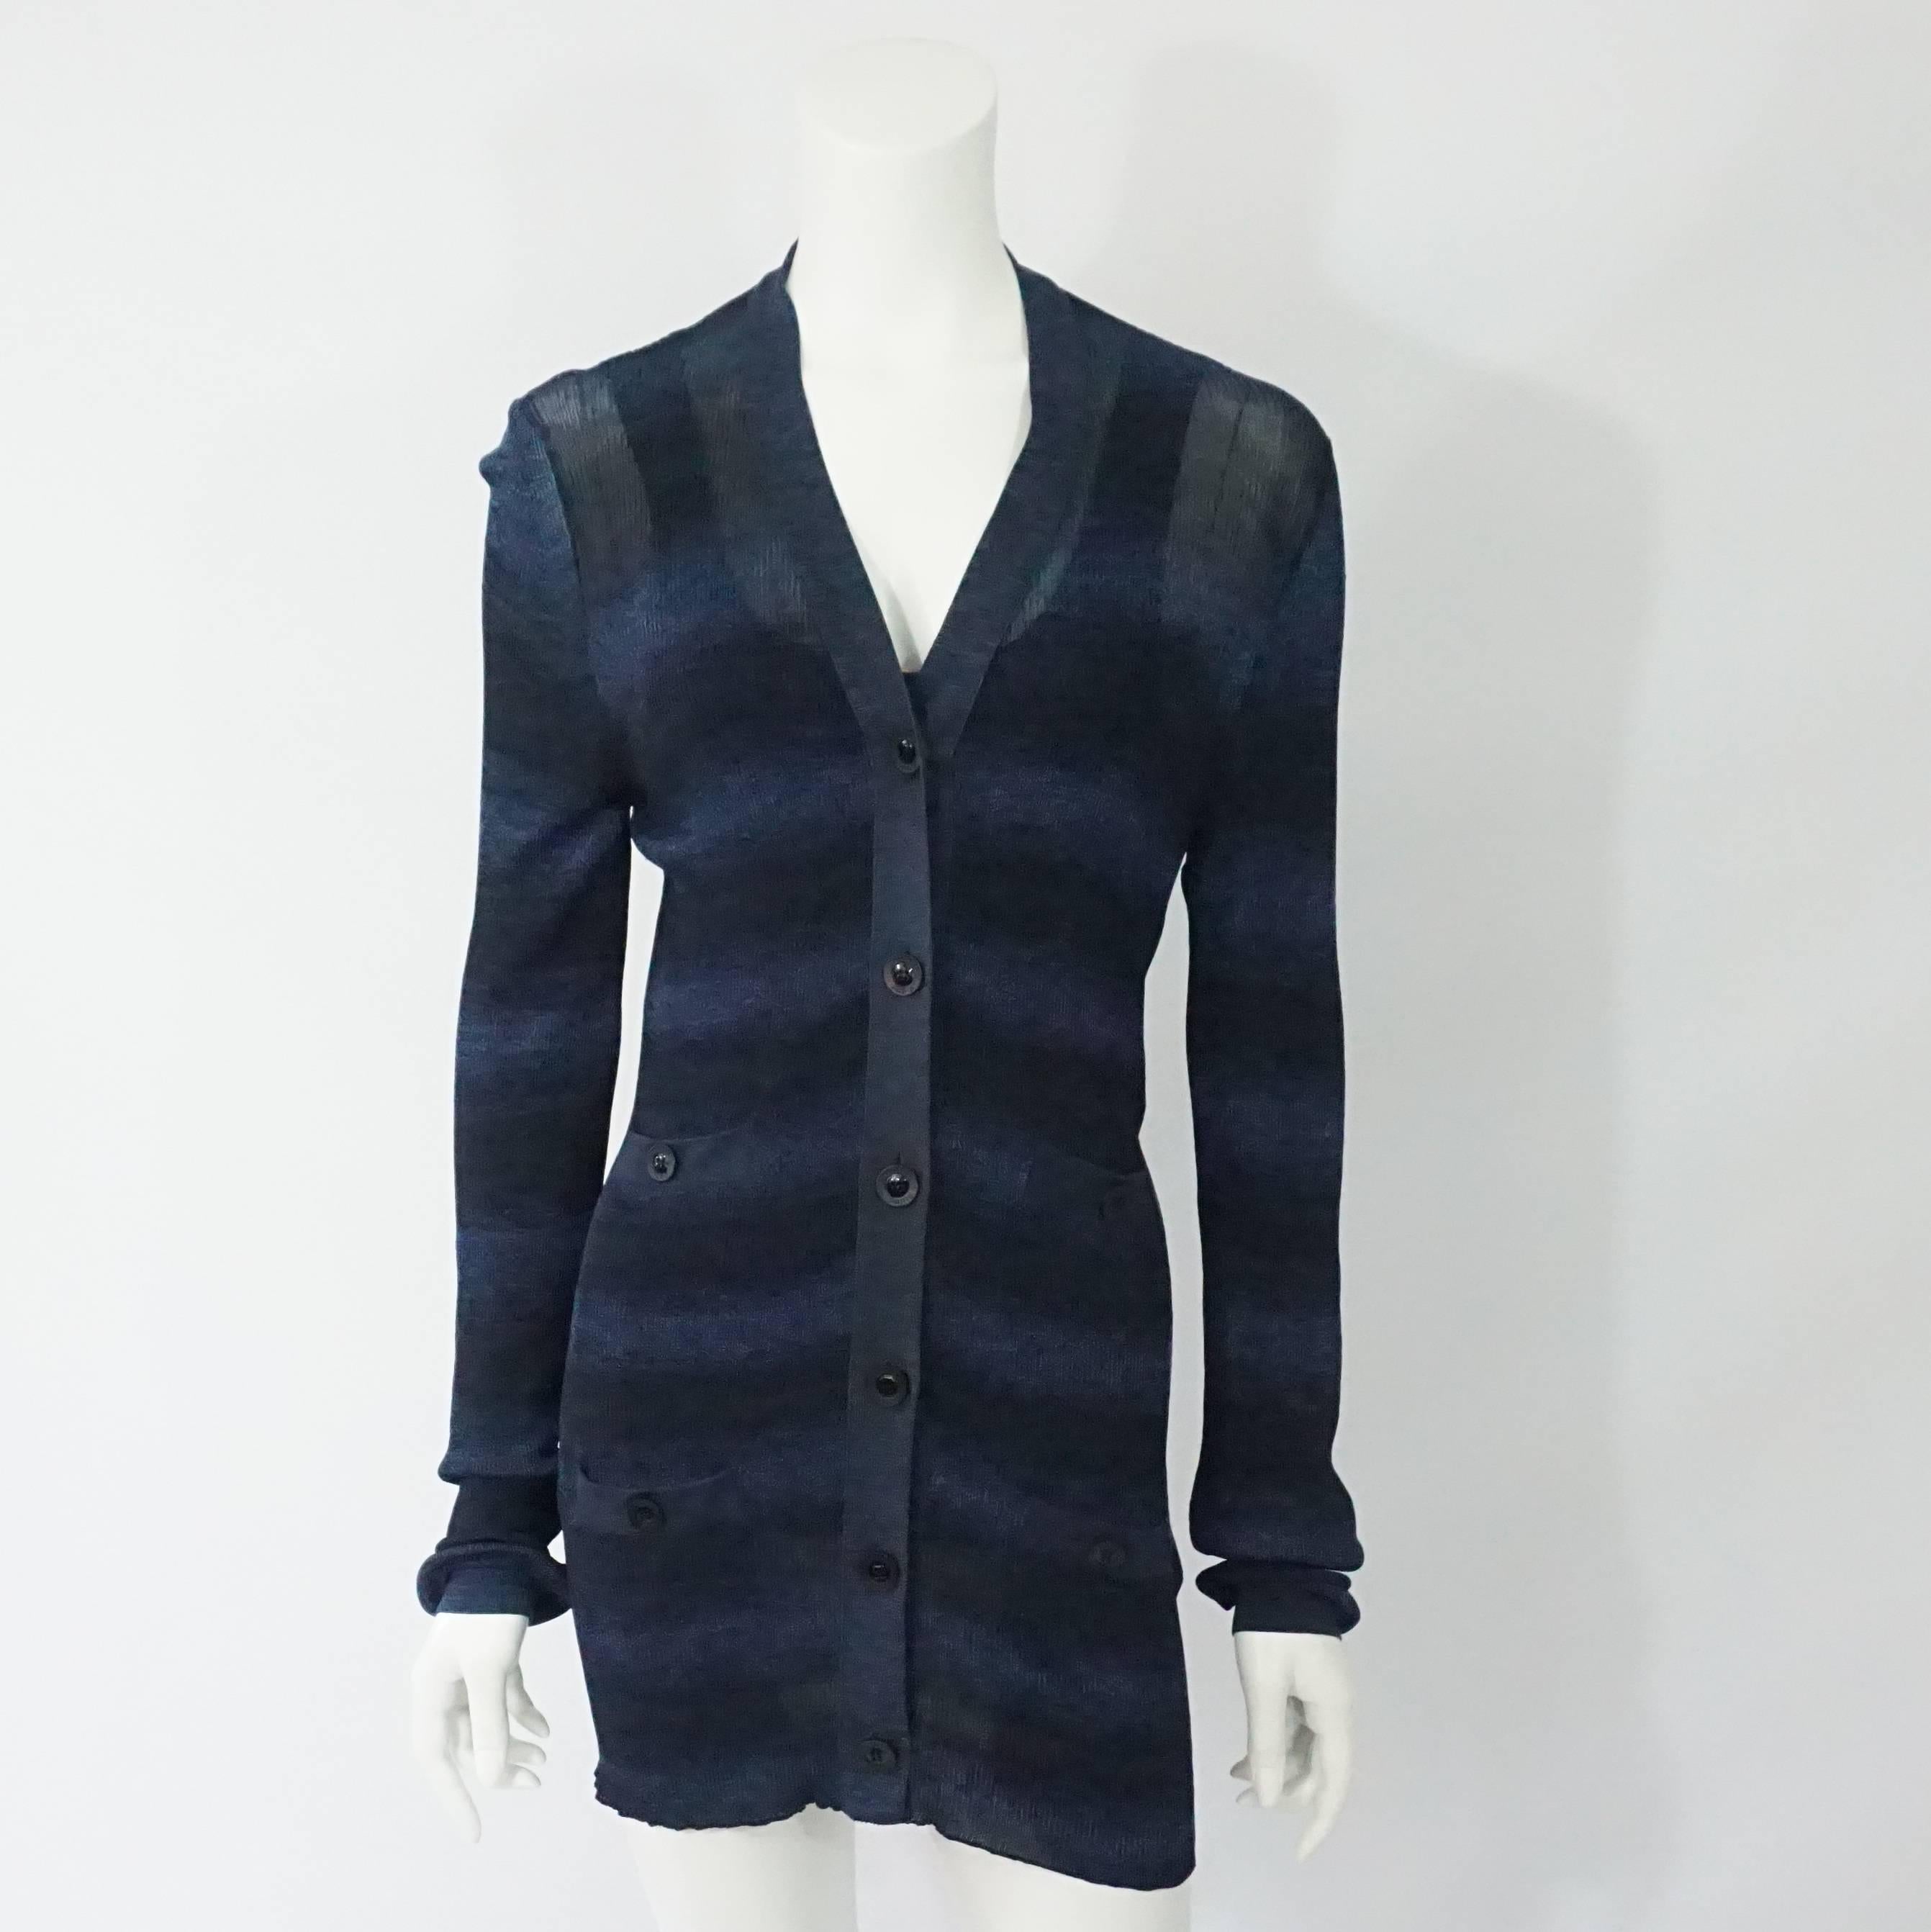 Chanel Two Tone Stripe Navy Long Sweater Set - 42  This very elegant navy sweater set has two tones of navy blue with horizontal thick stripes and a metallic stitching within the knit. The inside piece is a sleeveless top, and the cardigan is long.